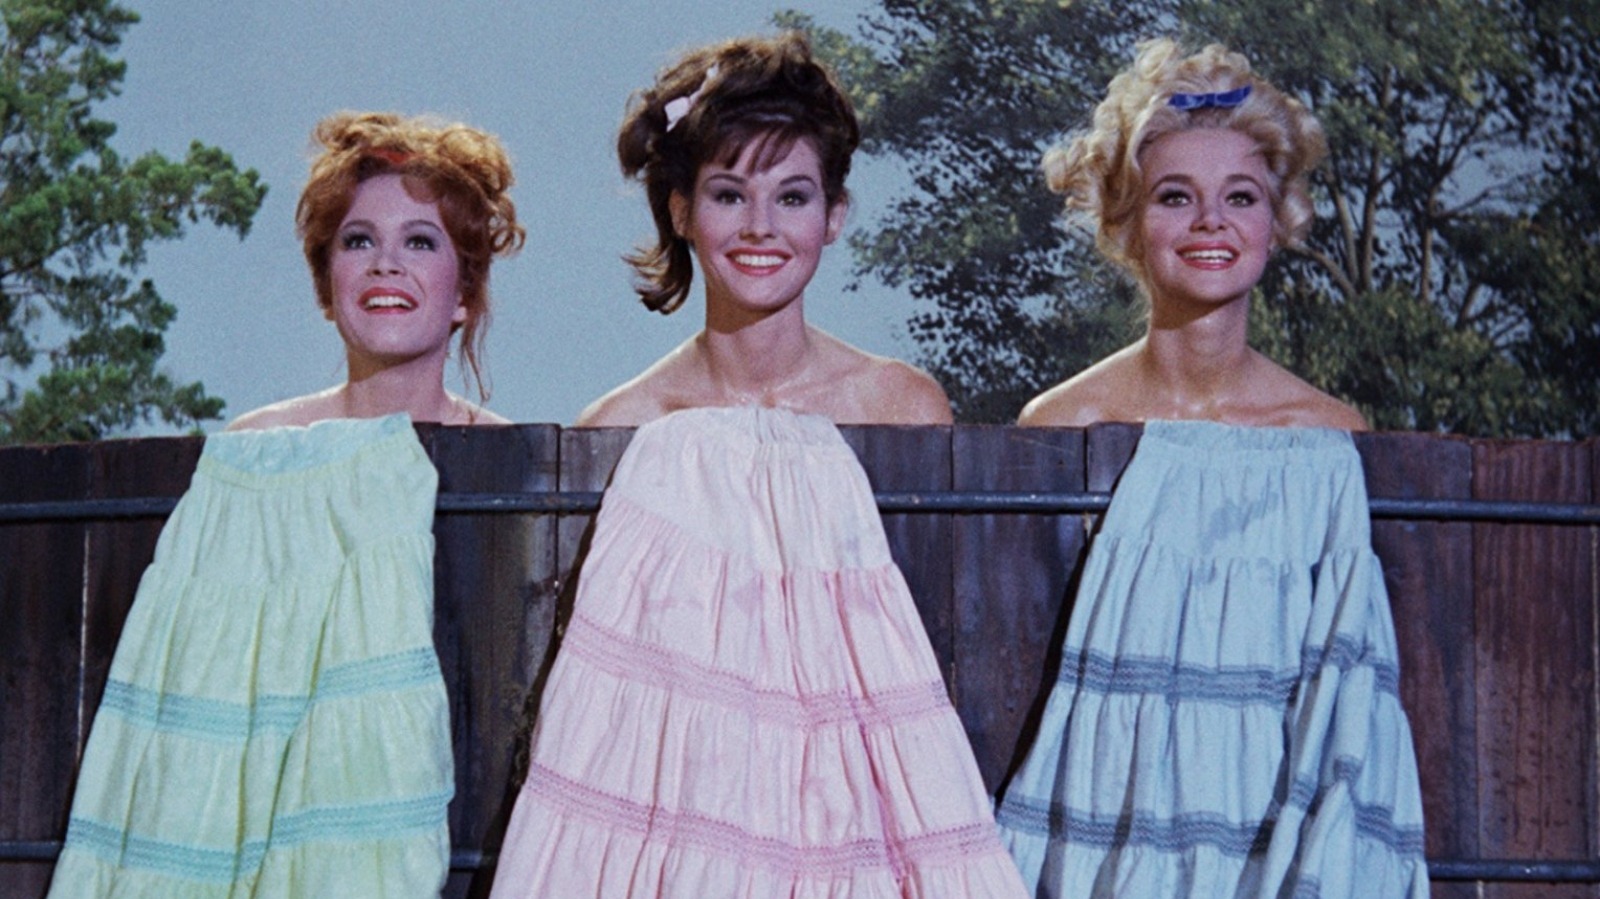 The Only Major Actors Still Alive From Petticoat Junction